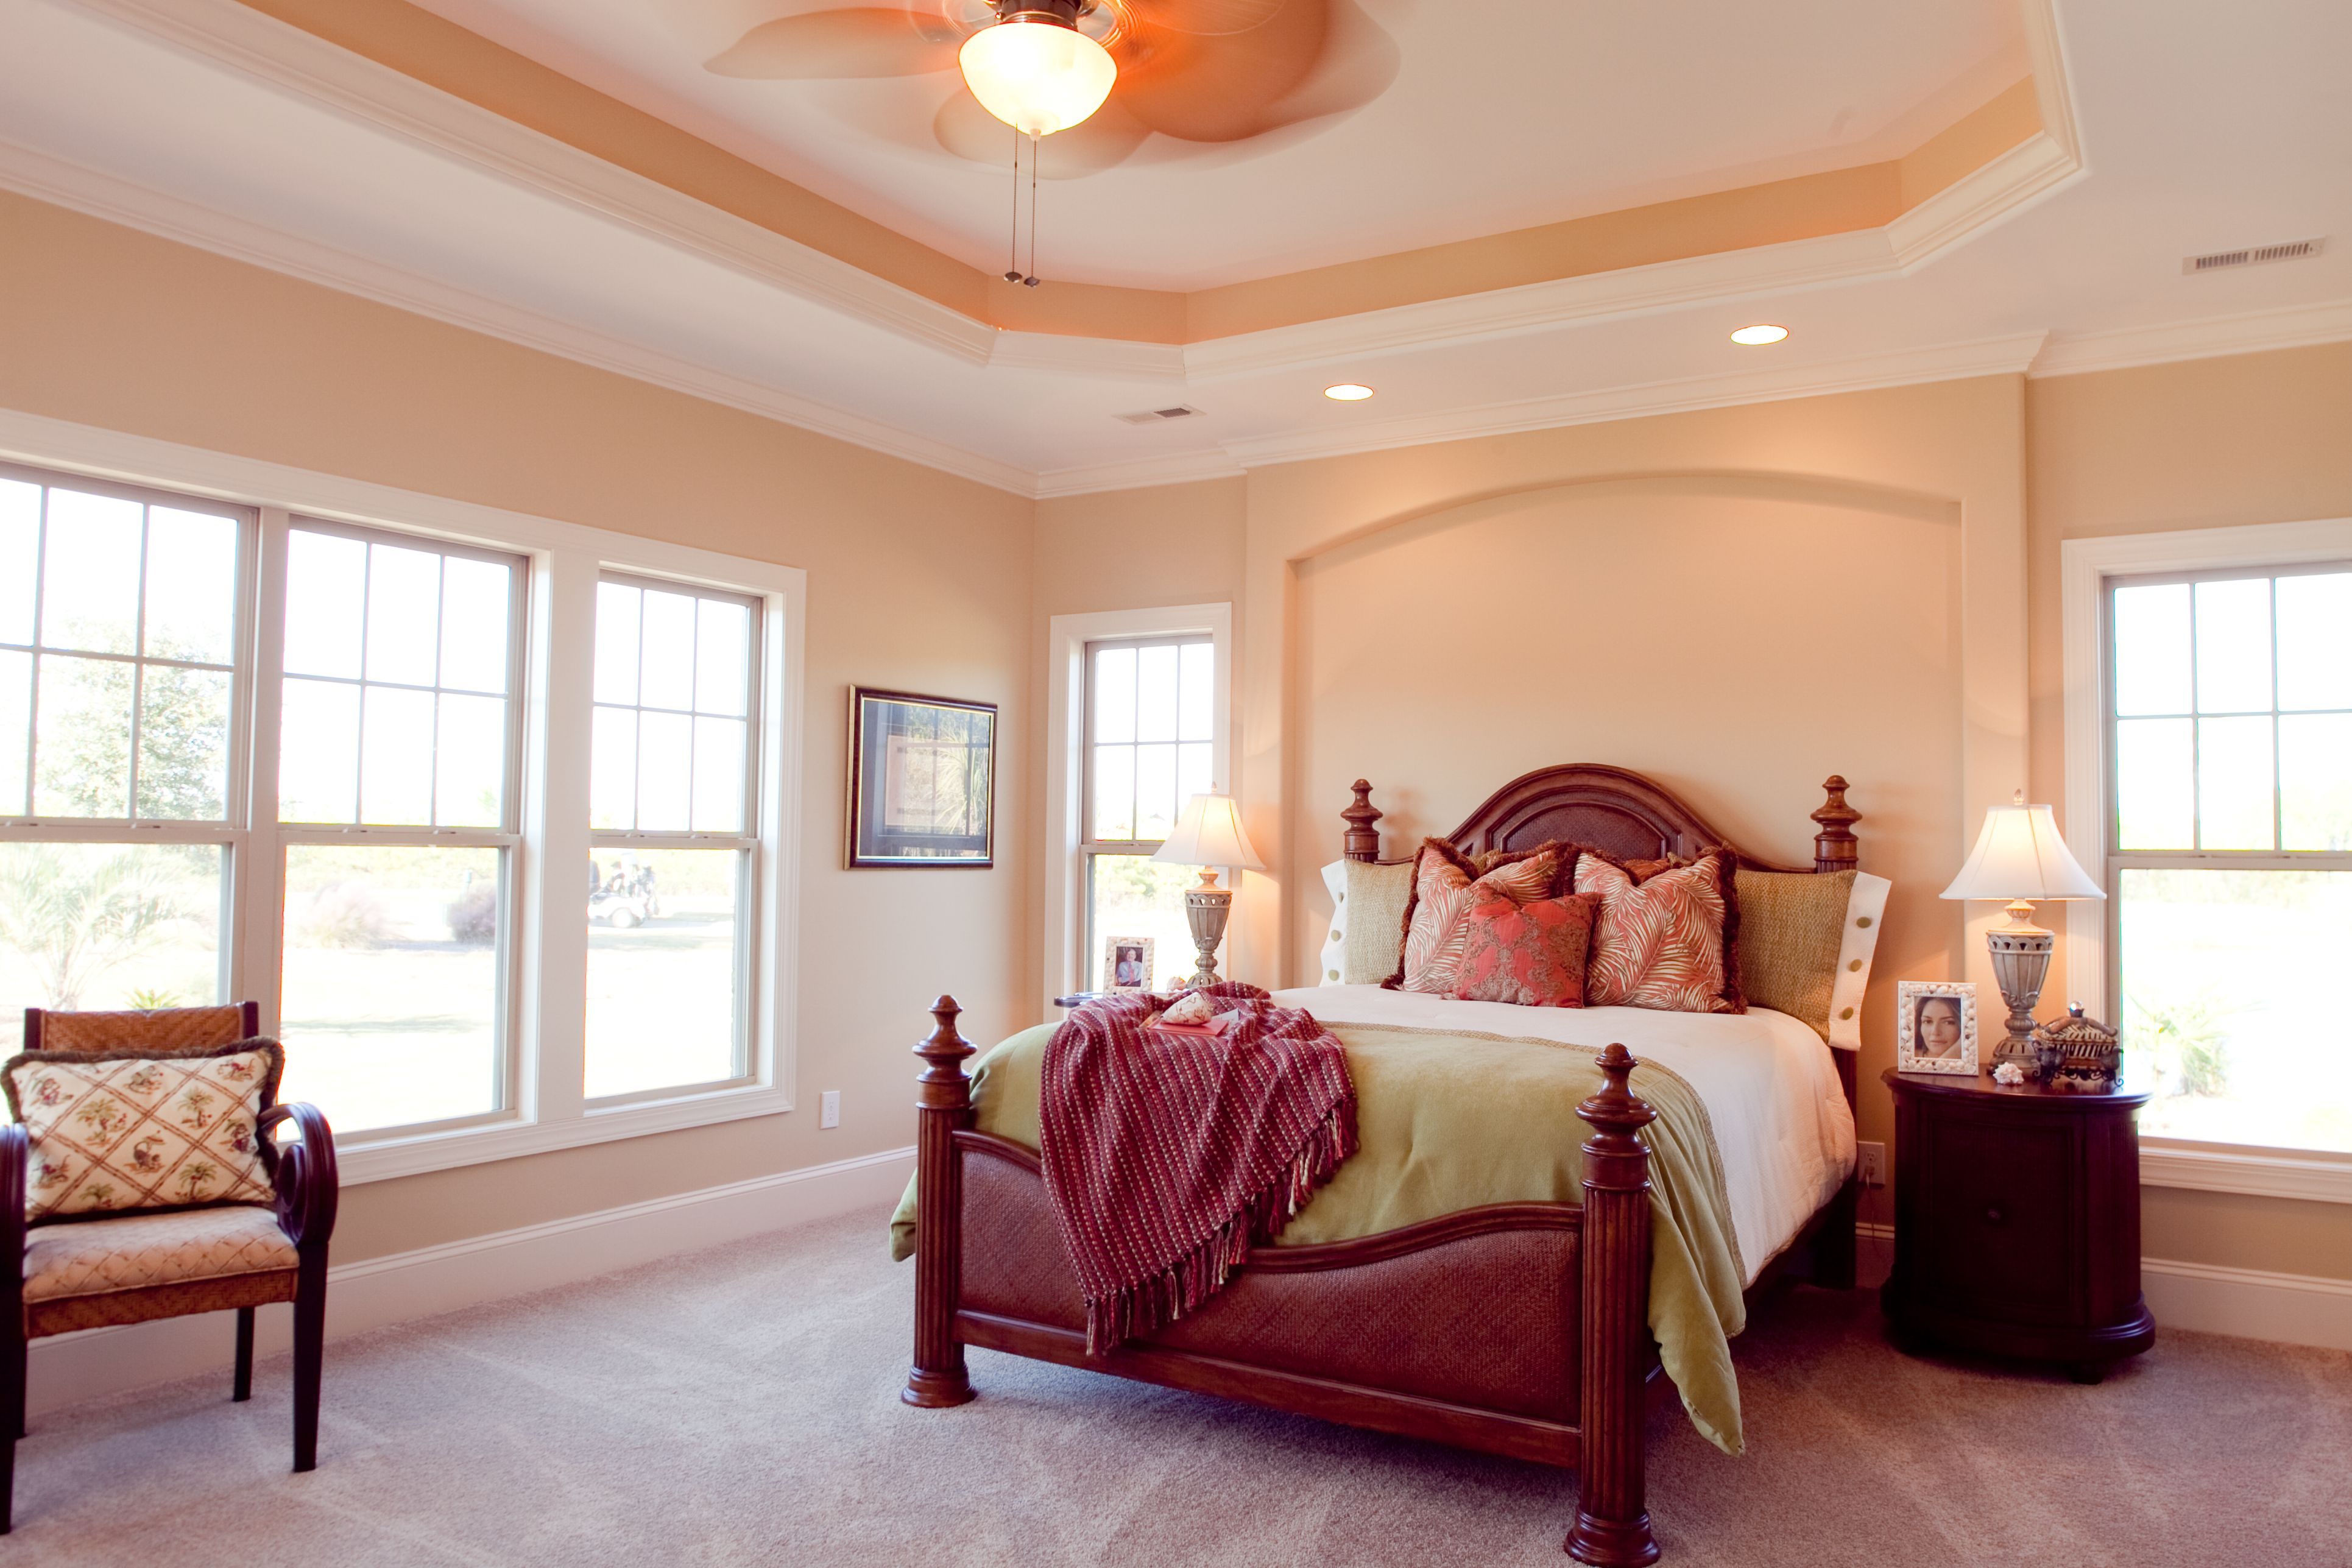 From Blank To Beautiful: Inspirational Bedroom Ceiling Makeover Ideas